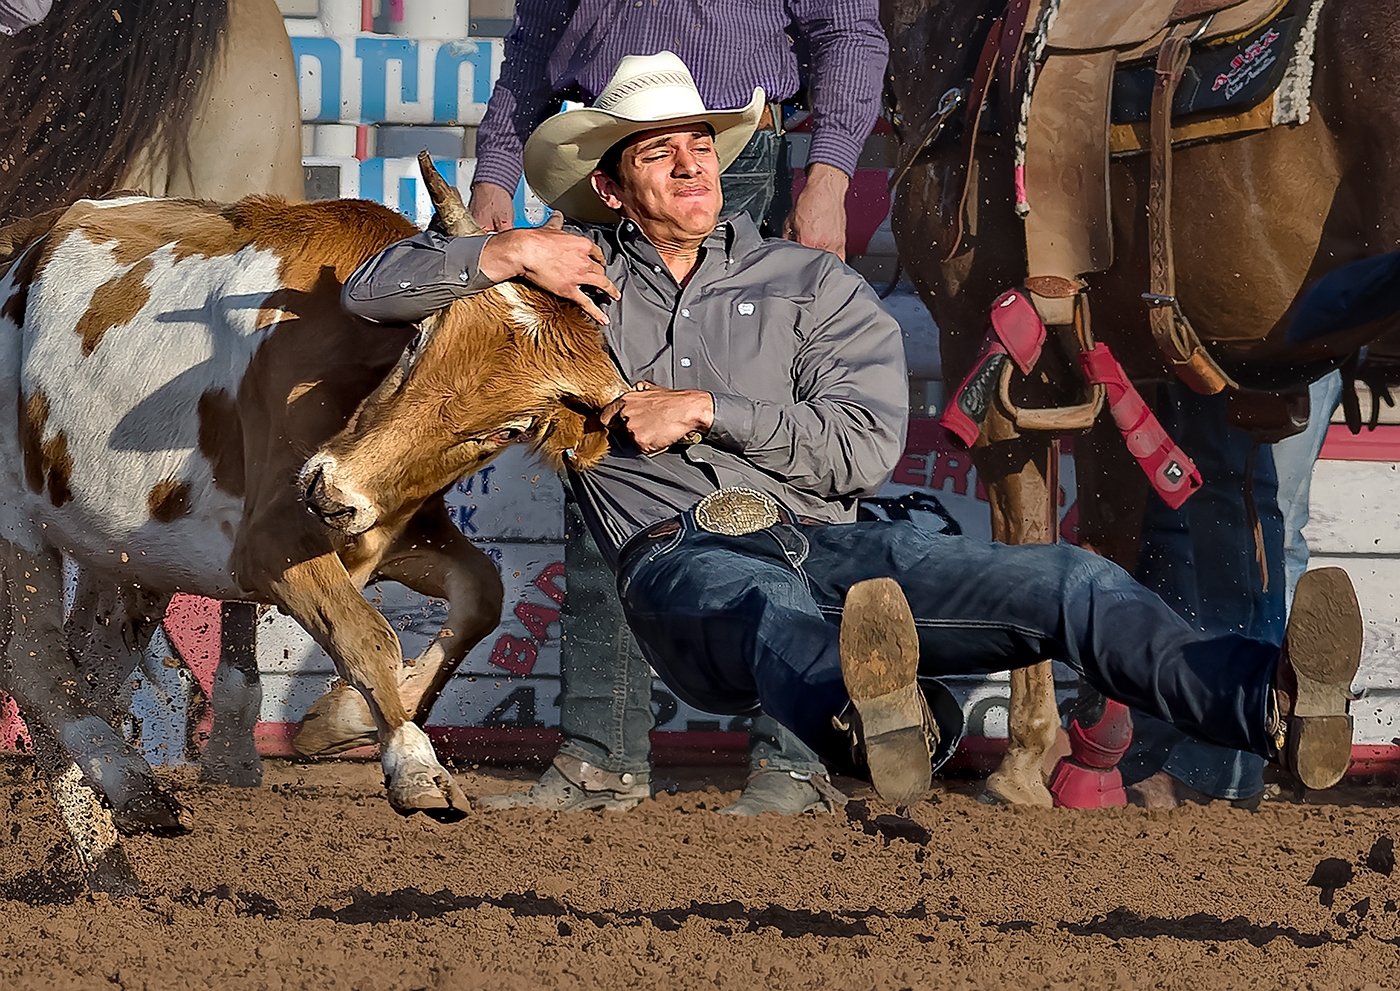 Easier with Eyes Closed, Tom Savage, Cowtown Camera Club,1st